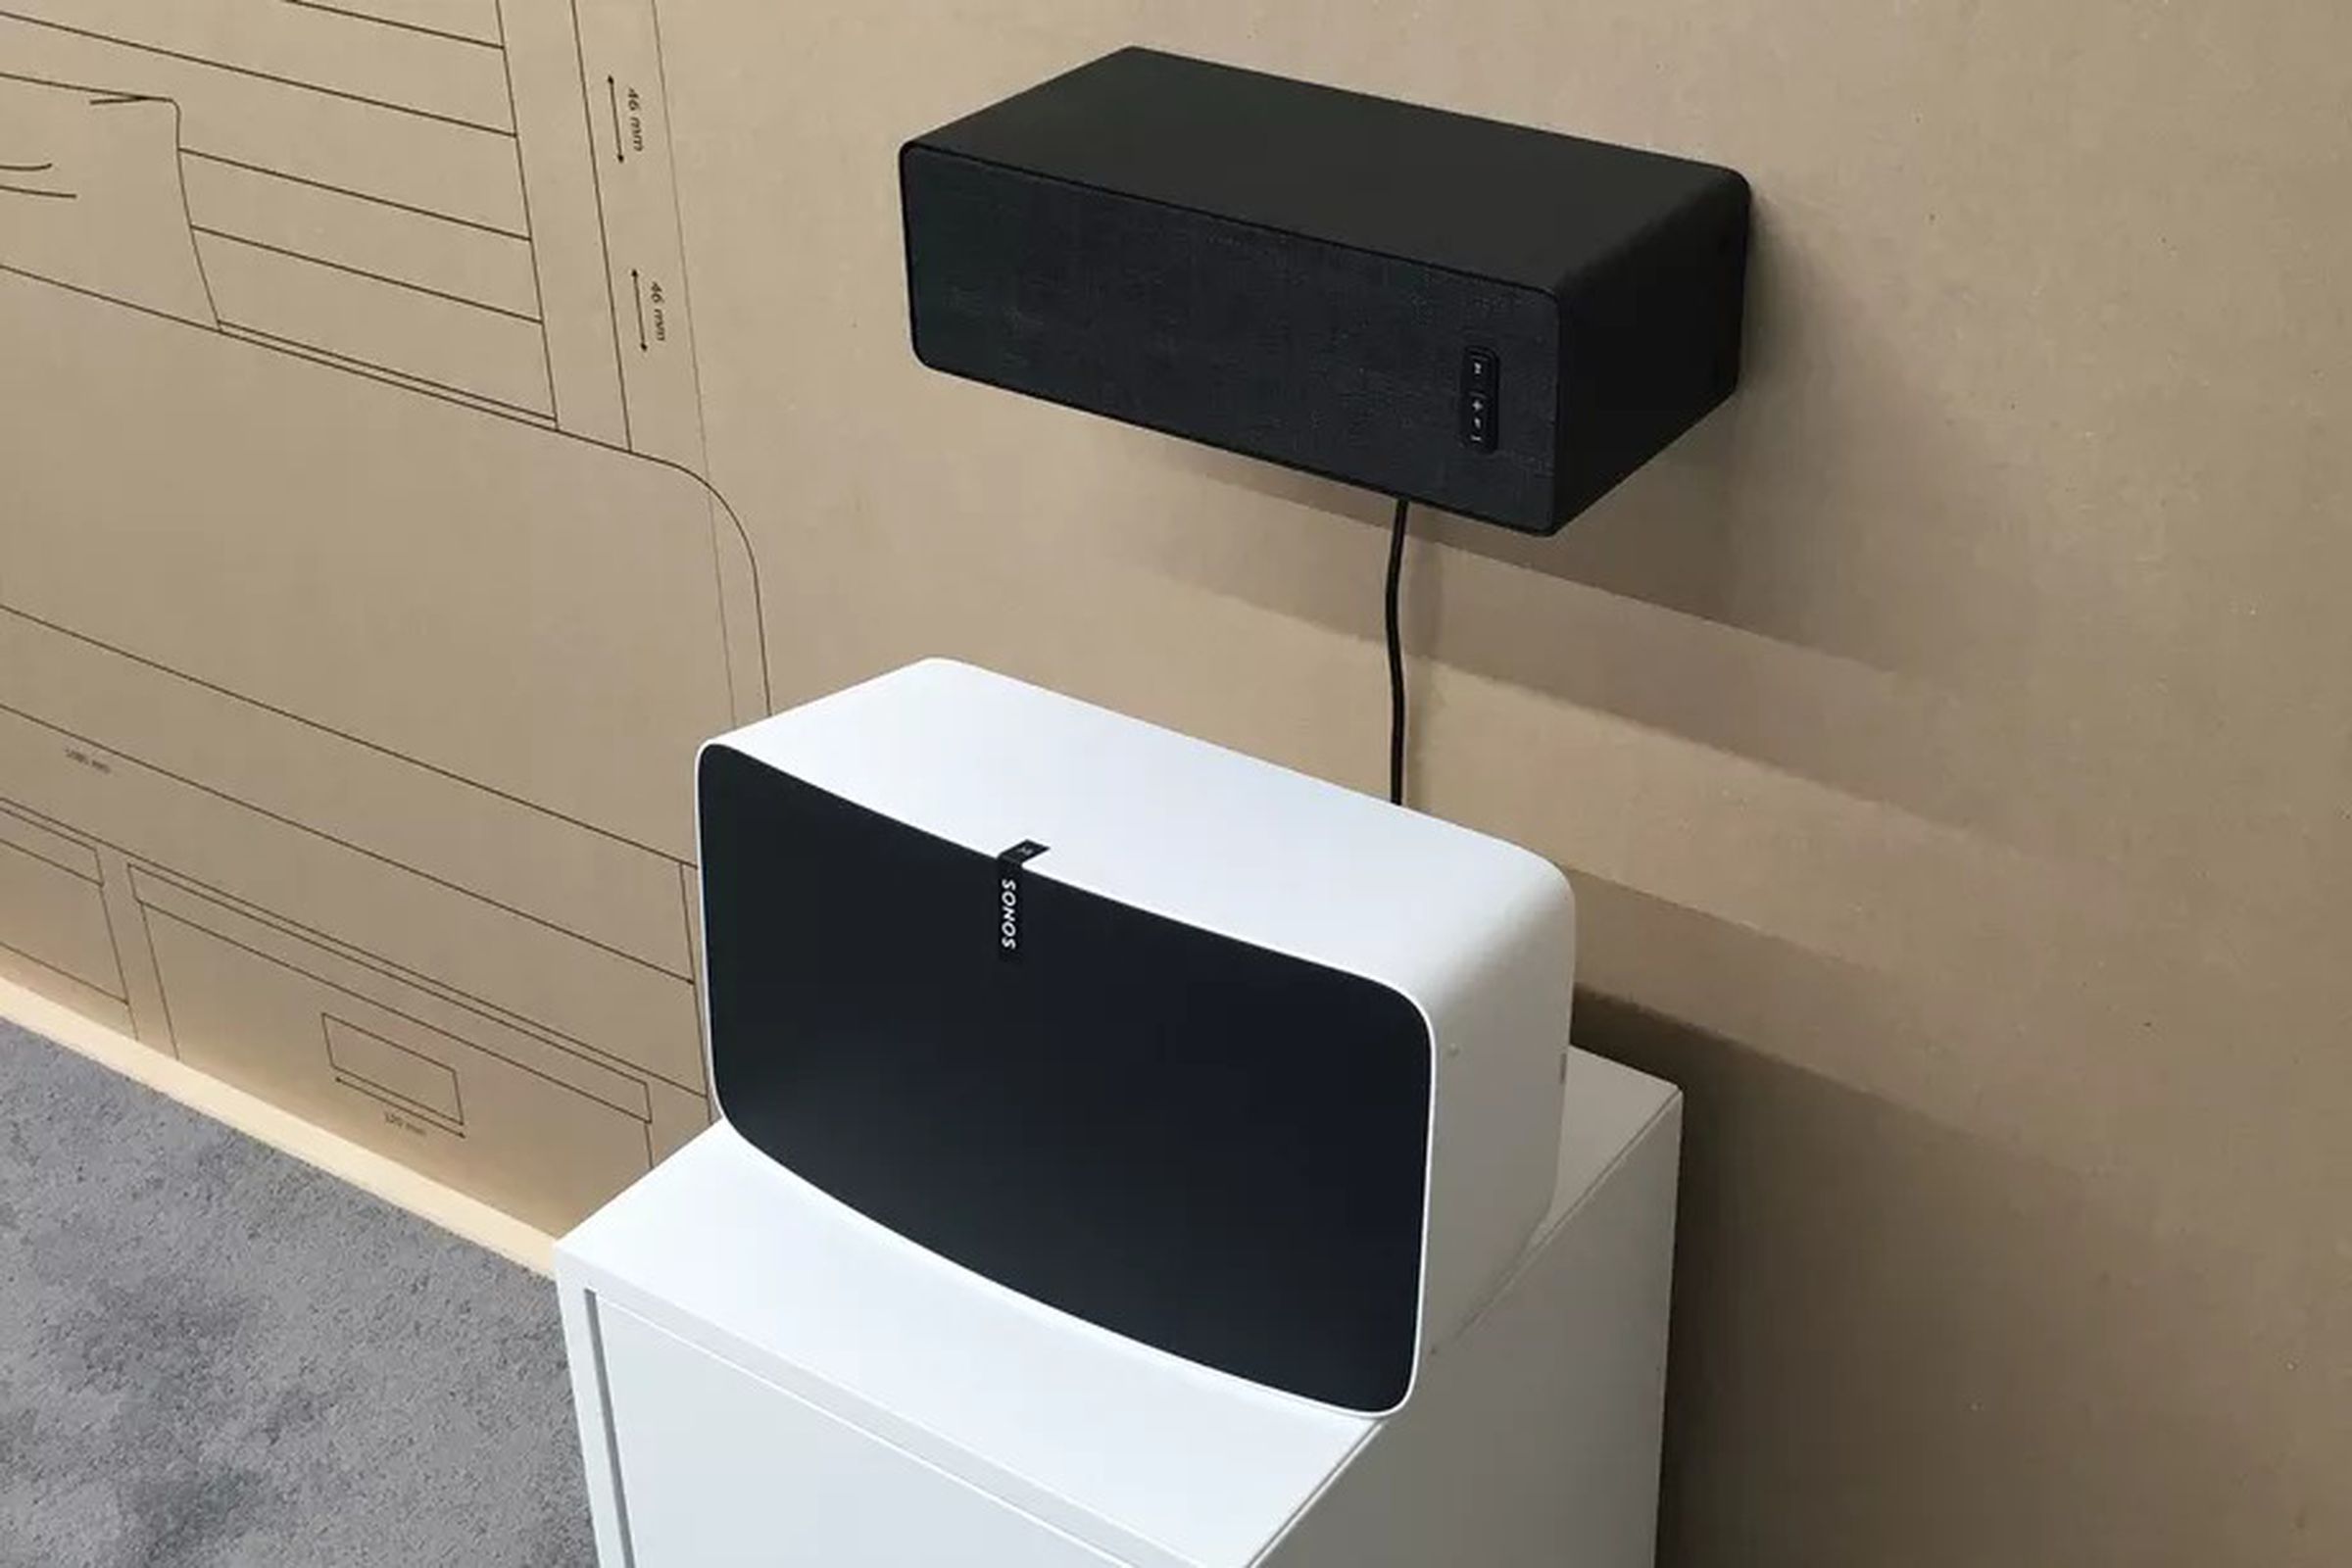 Prototype Ikea speaker attached to the wall above a Sonos Play:5. 